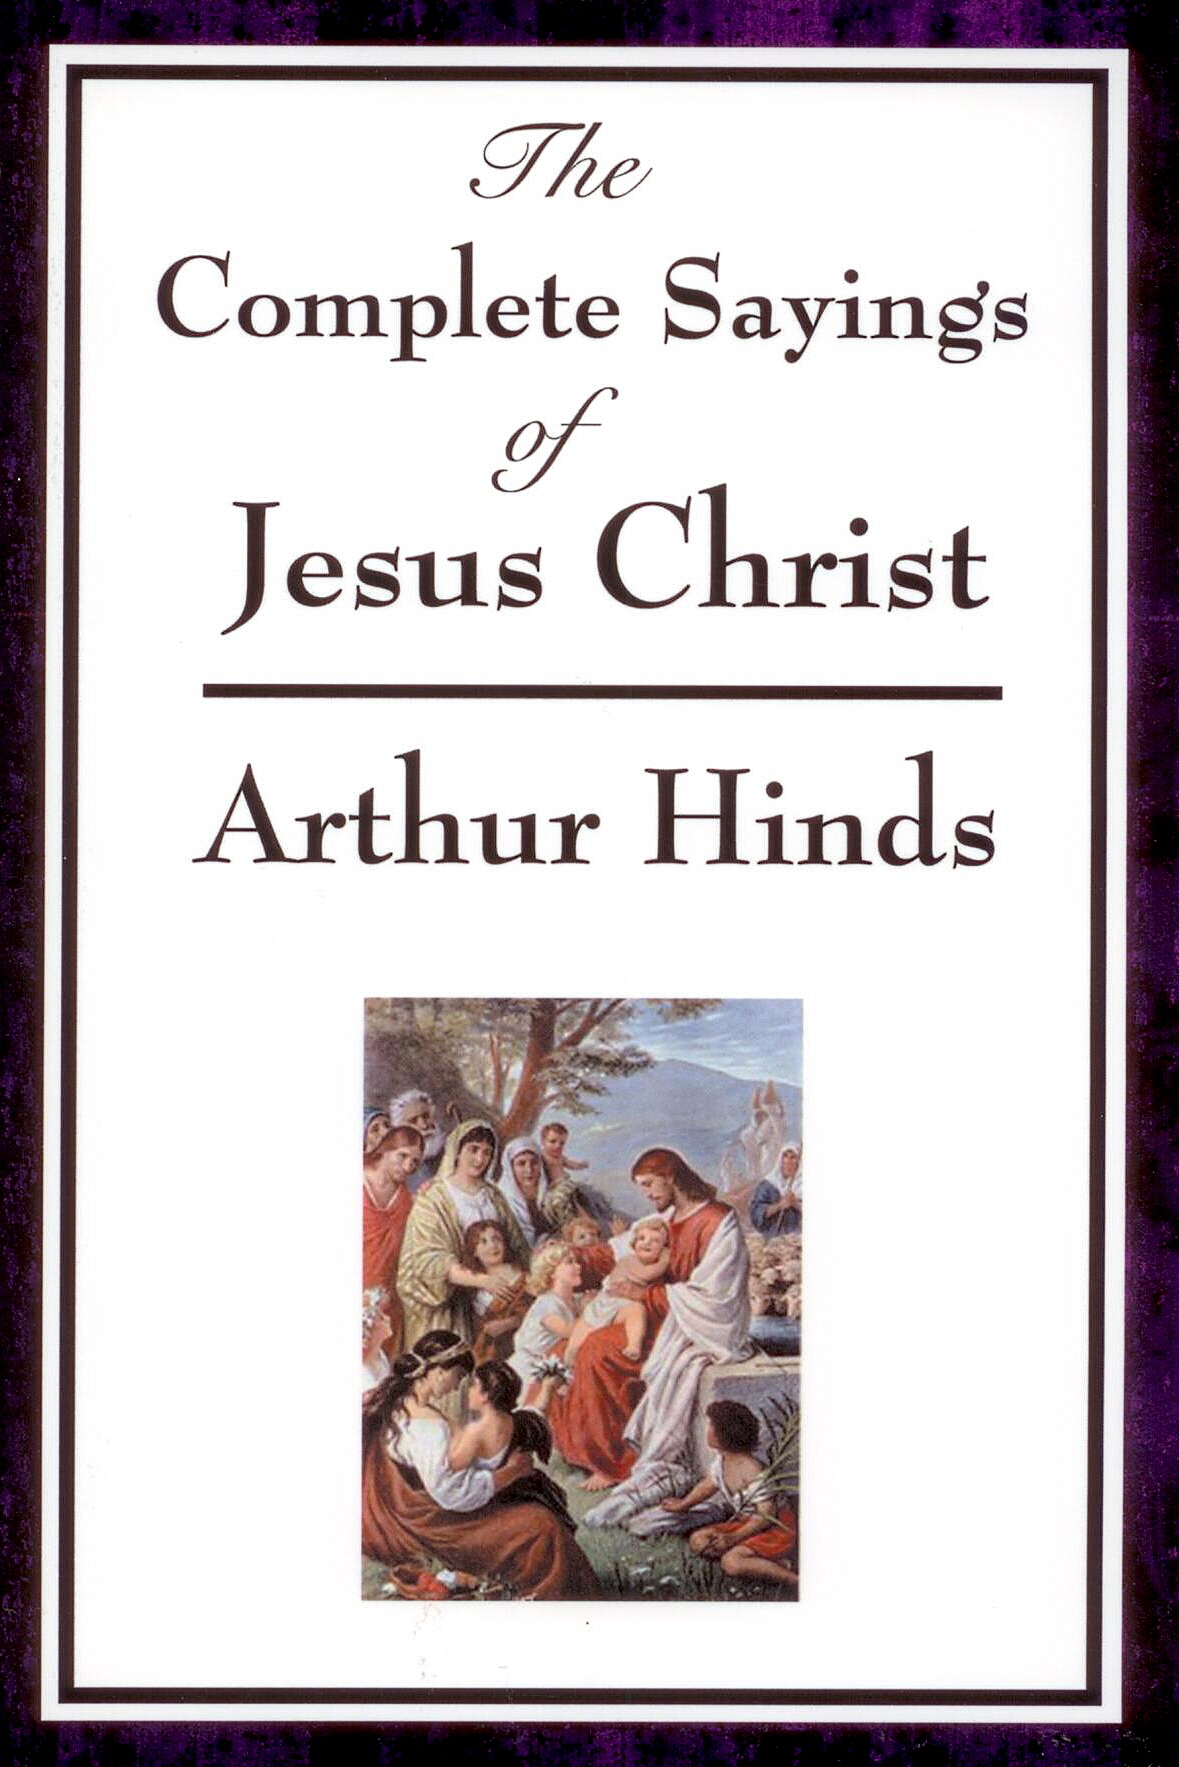 The Complete Sayings of Jesus Christ by Arthur Hinds